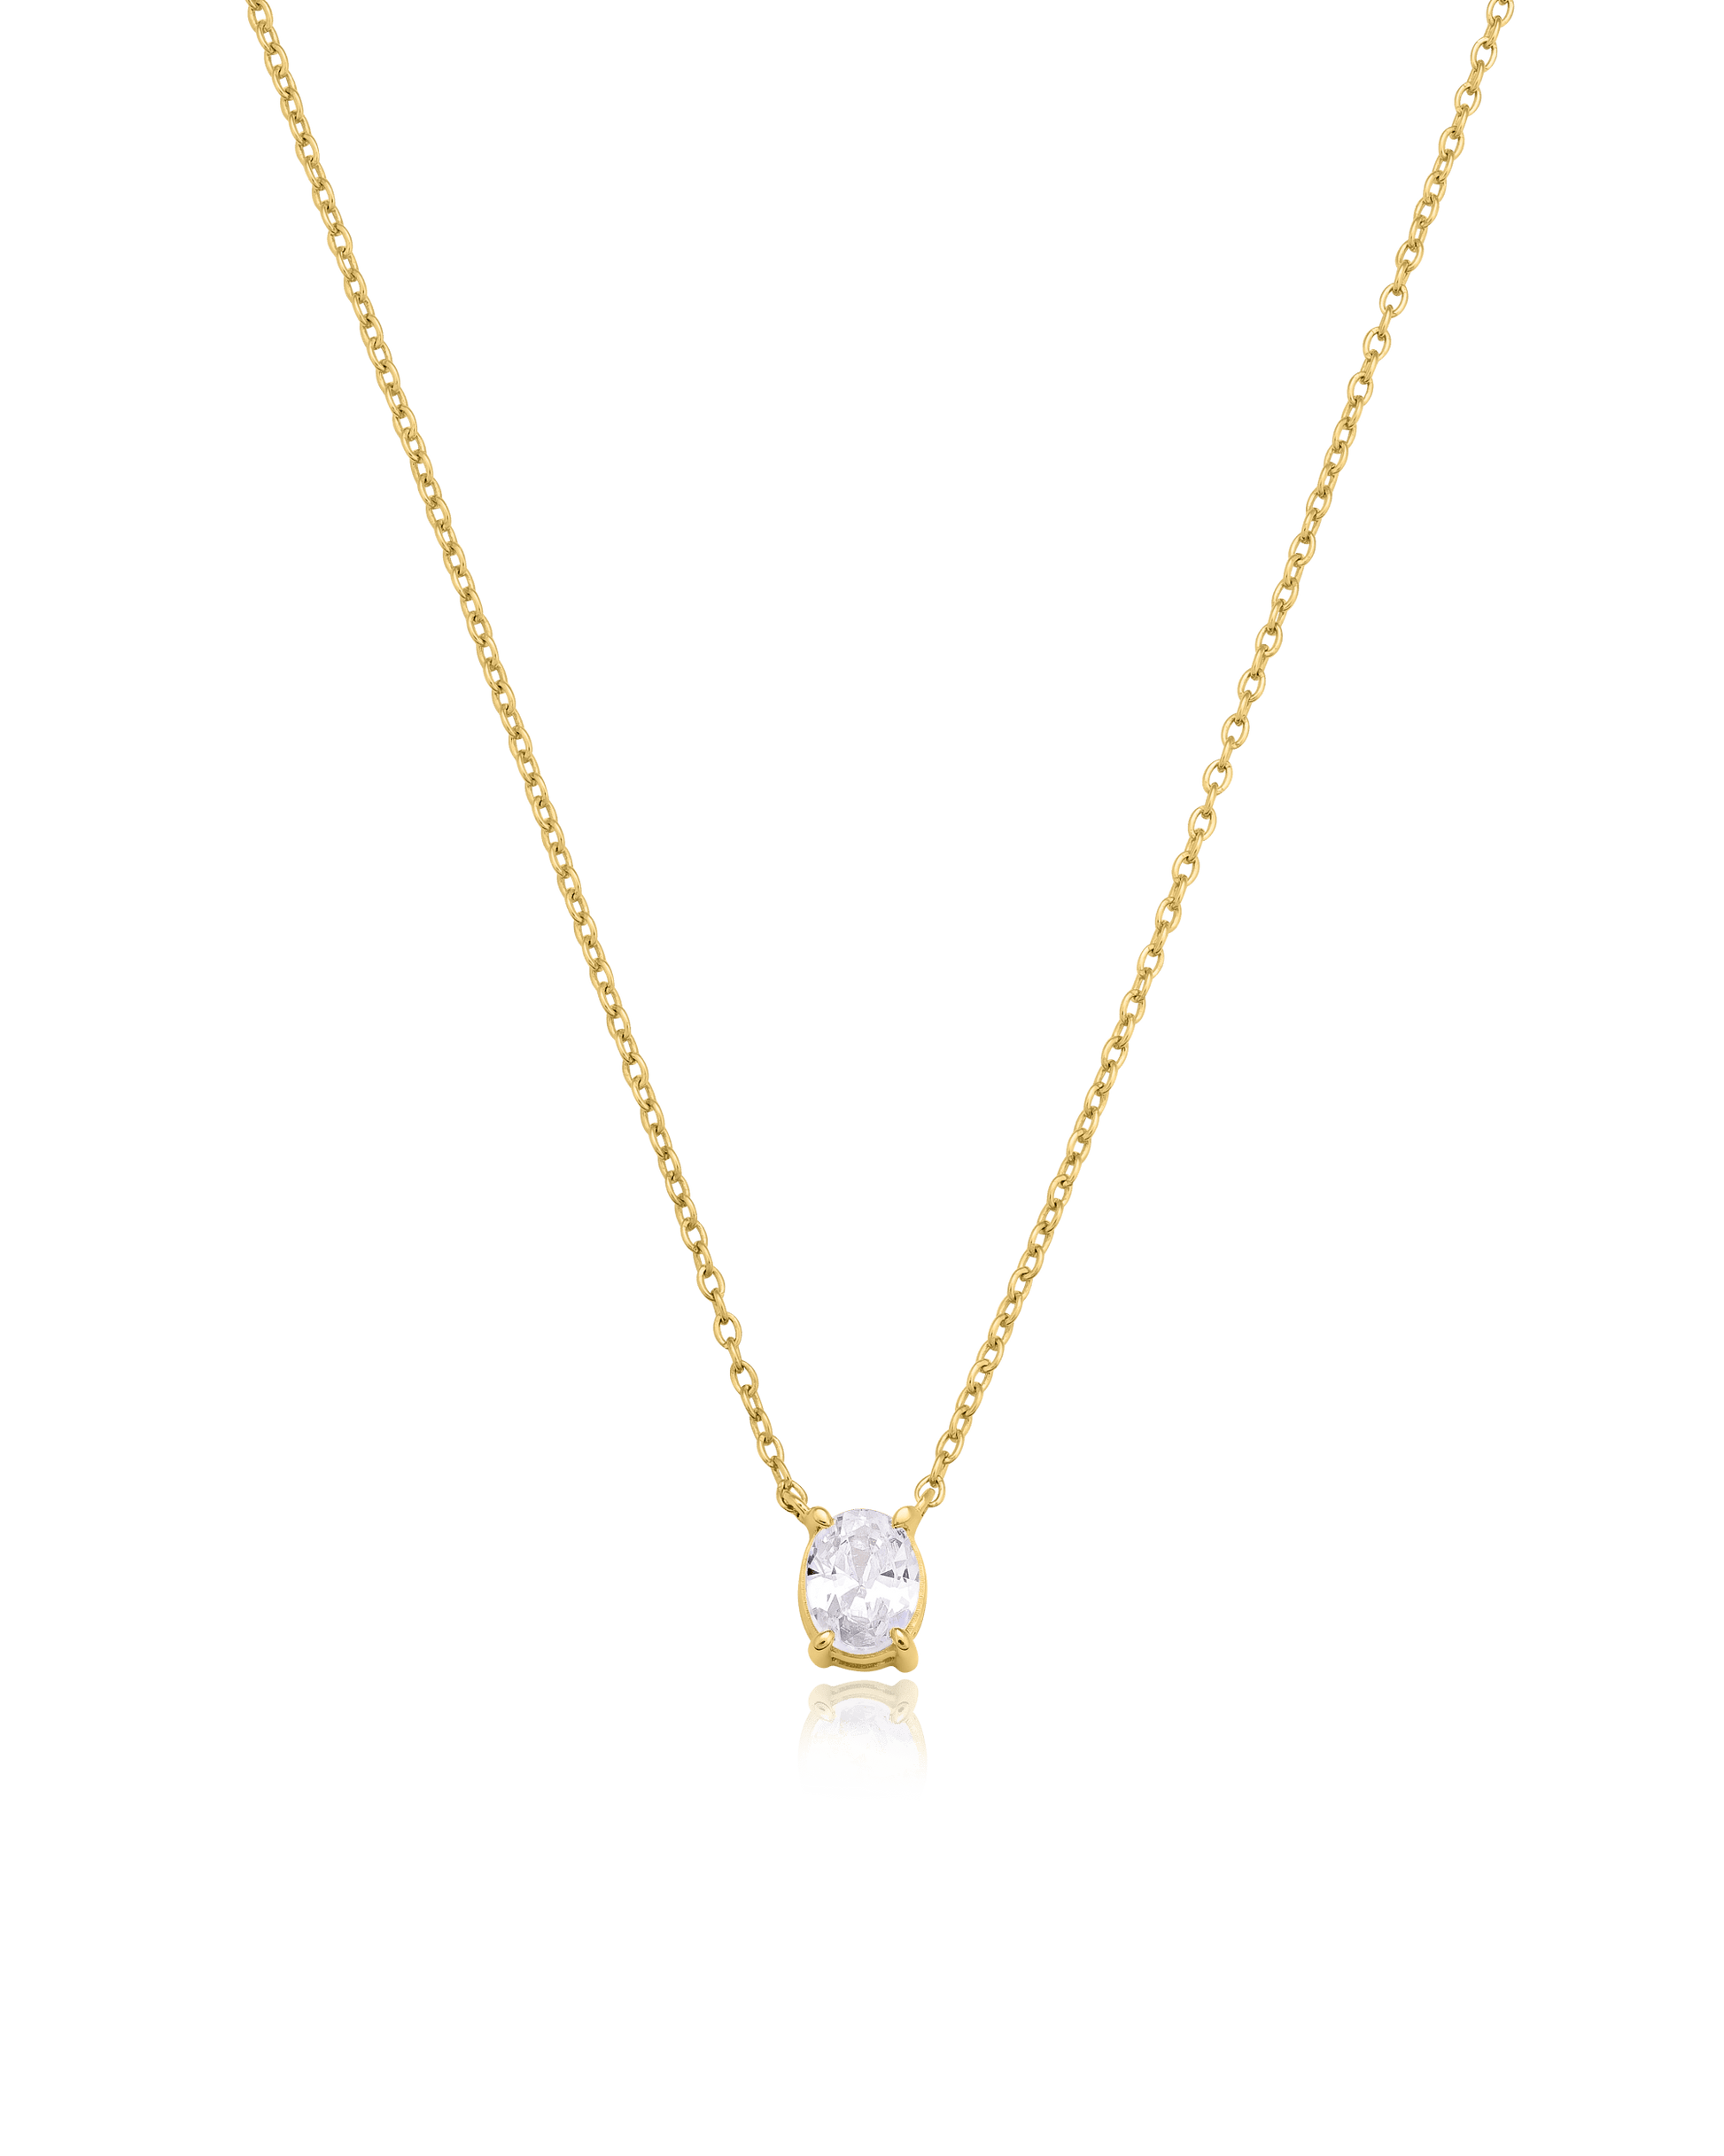 Oval Solitaire Diamond Necklace - 14K Yellow Gold Necklaces magal-dev 0.10 CT 16” 